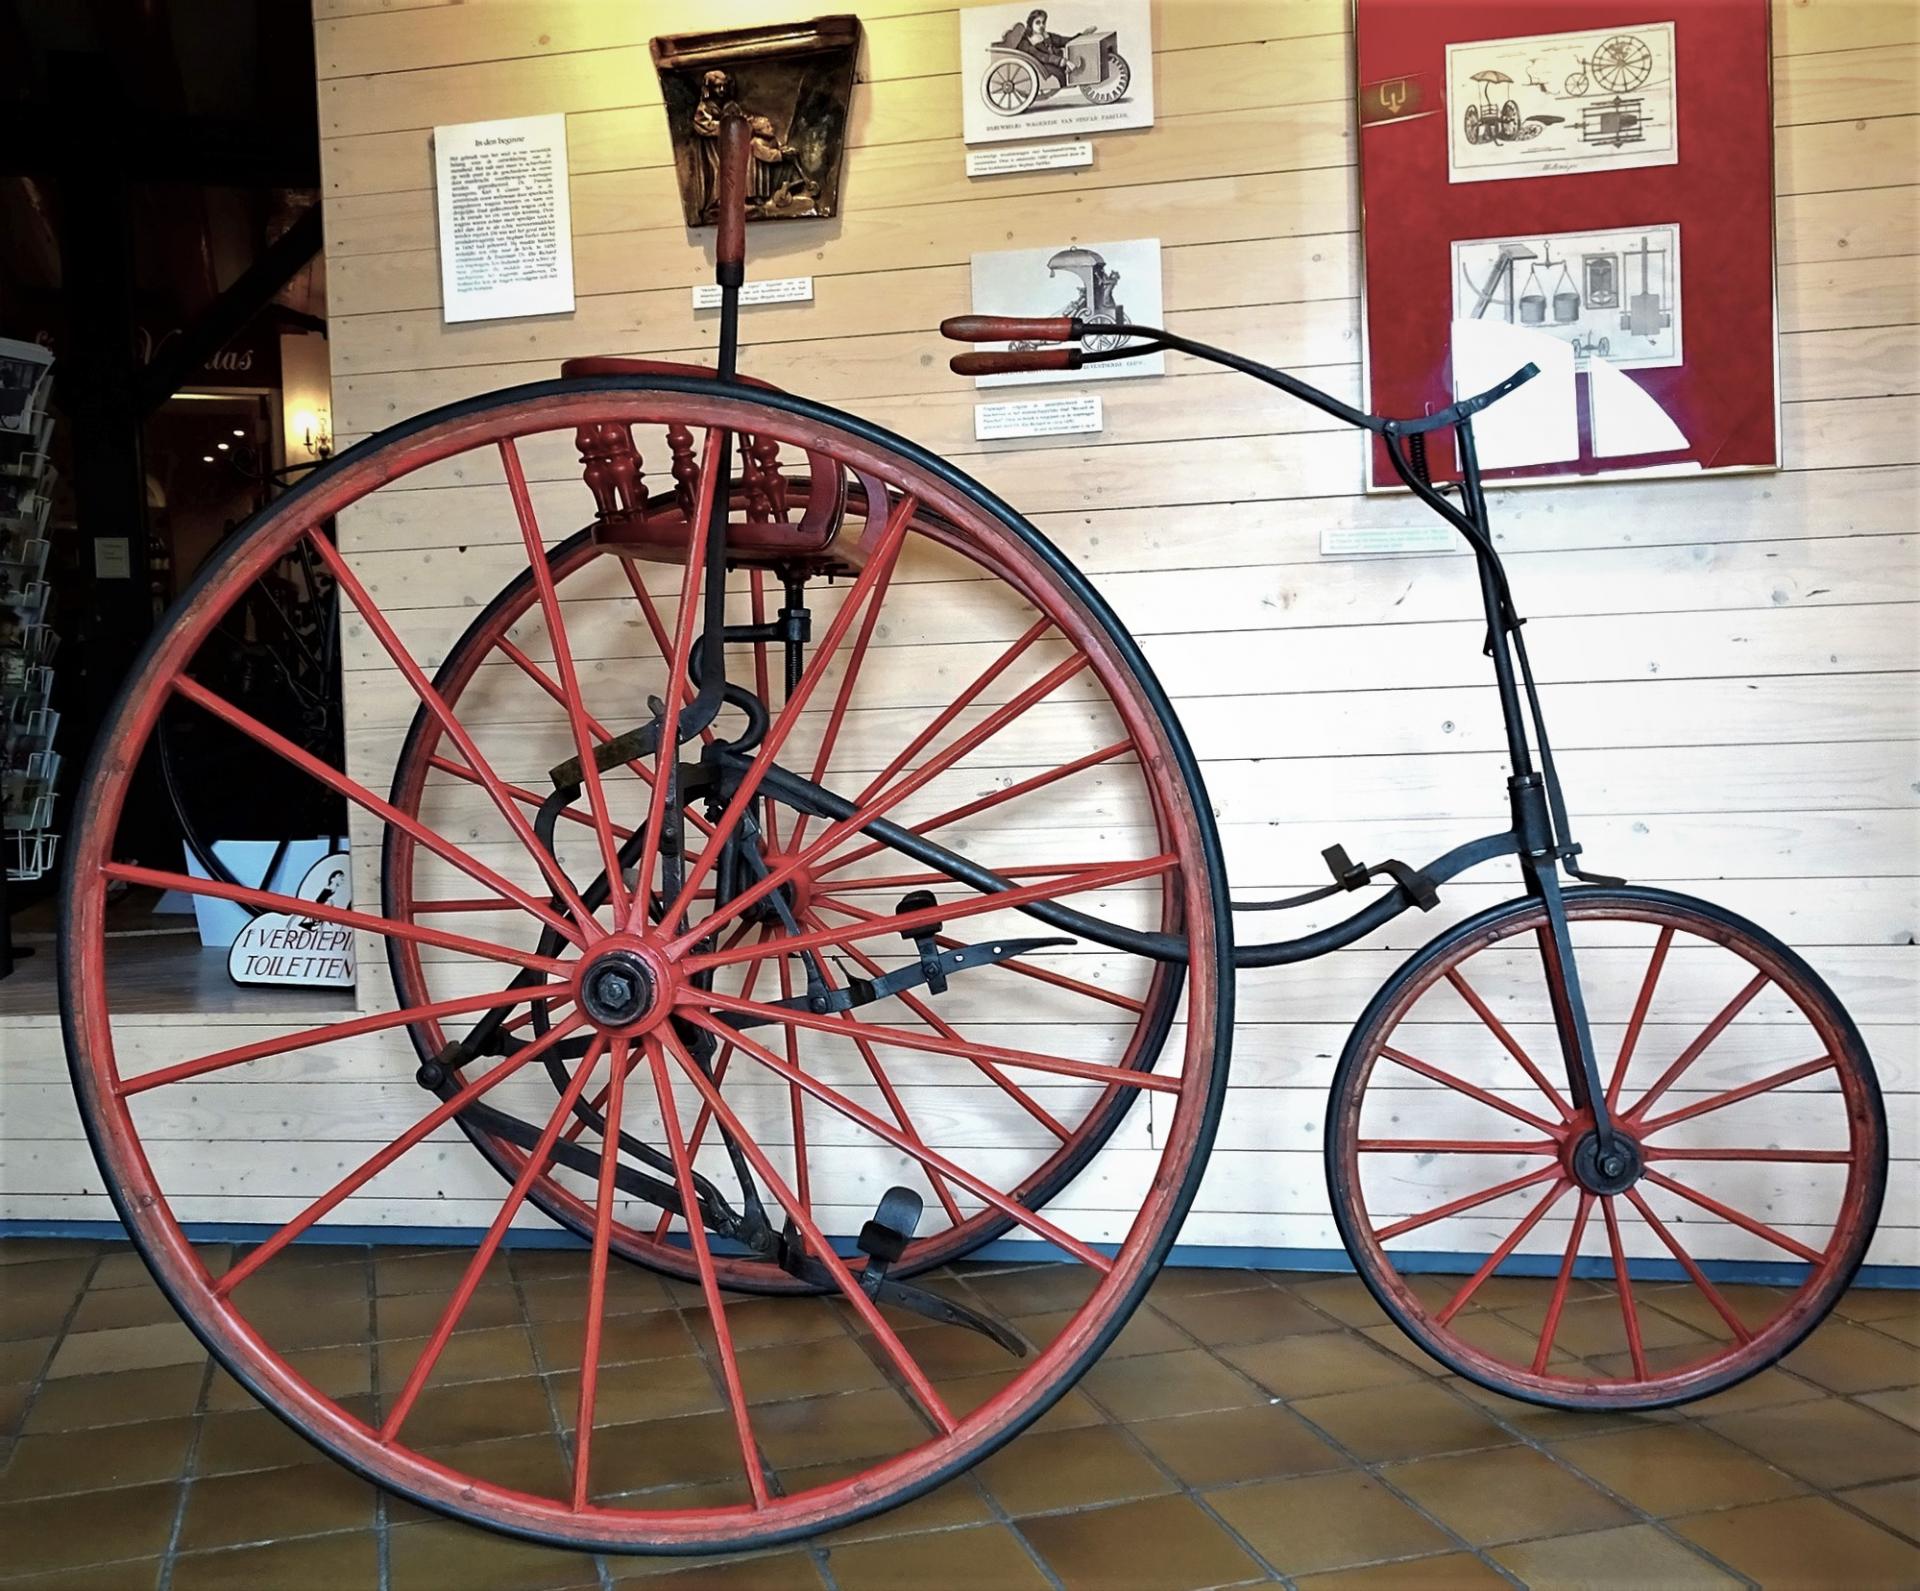 Pedo-Manomotive carriage, from France, approx. 1868